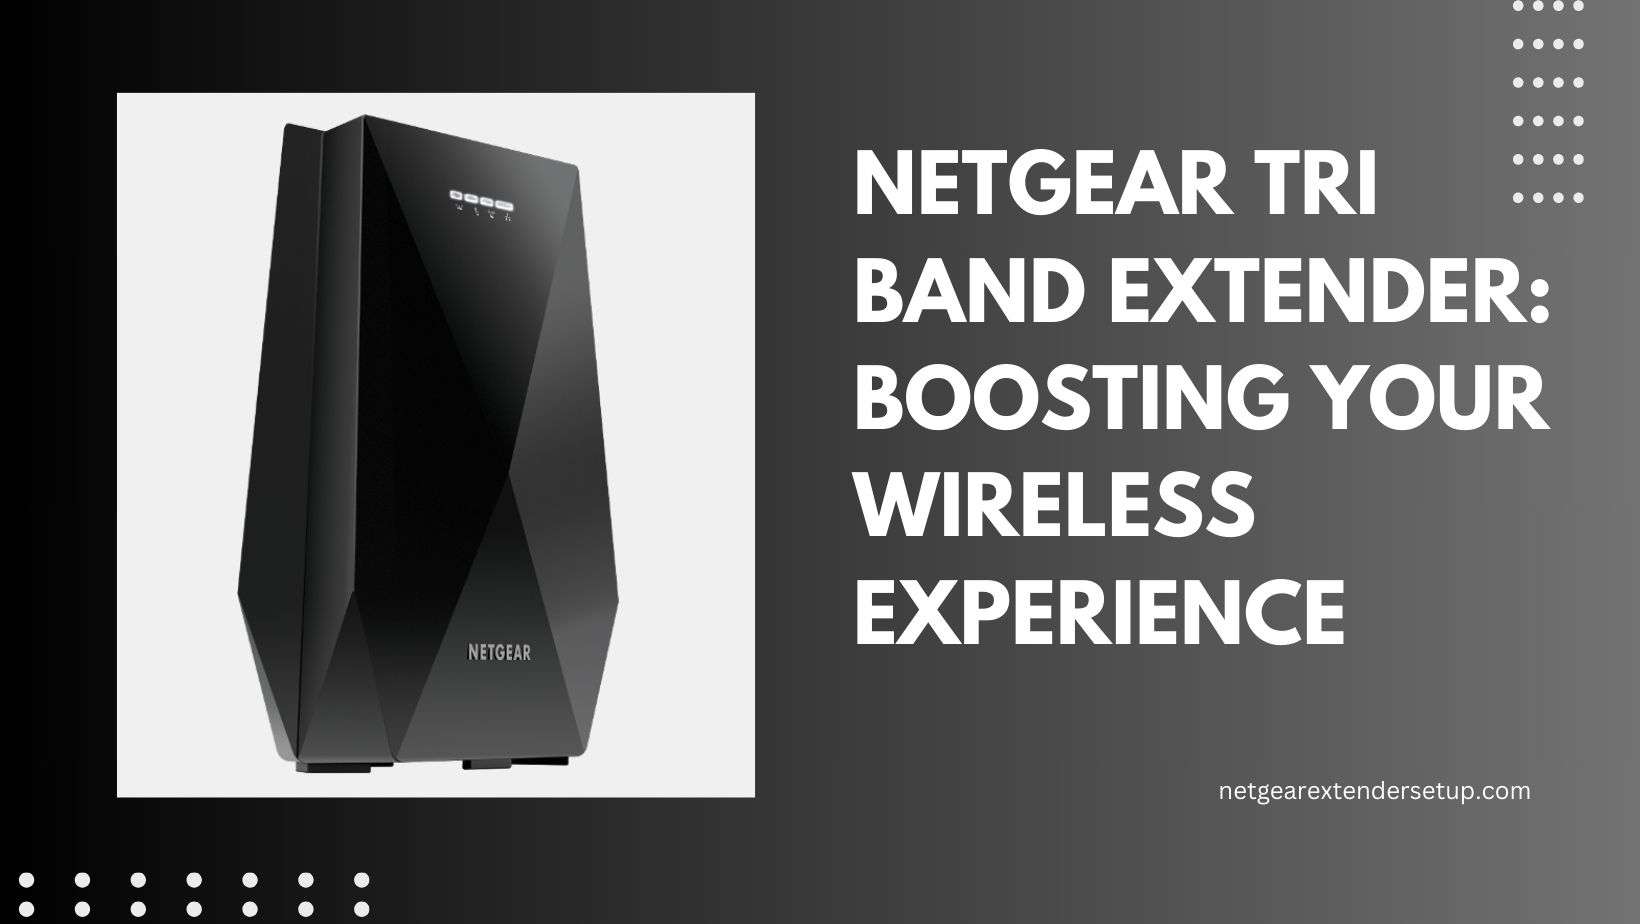 You are currently viewing Netgear Tri Band Extender: Boosting Your Wireless Experience